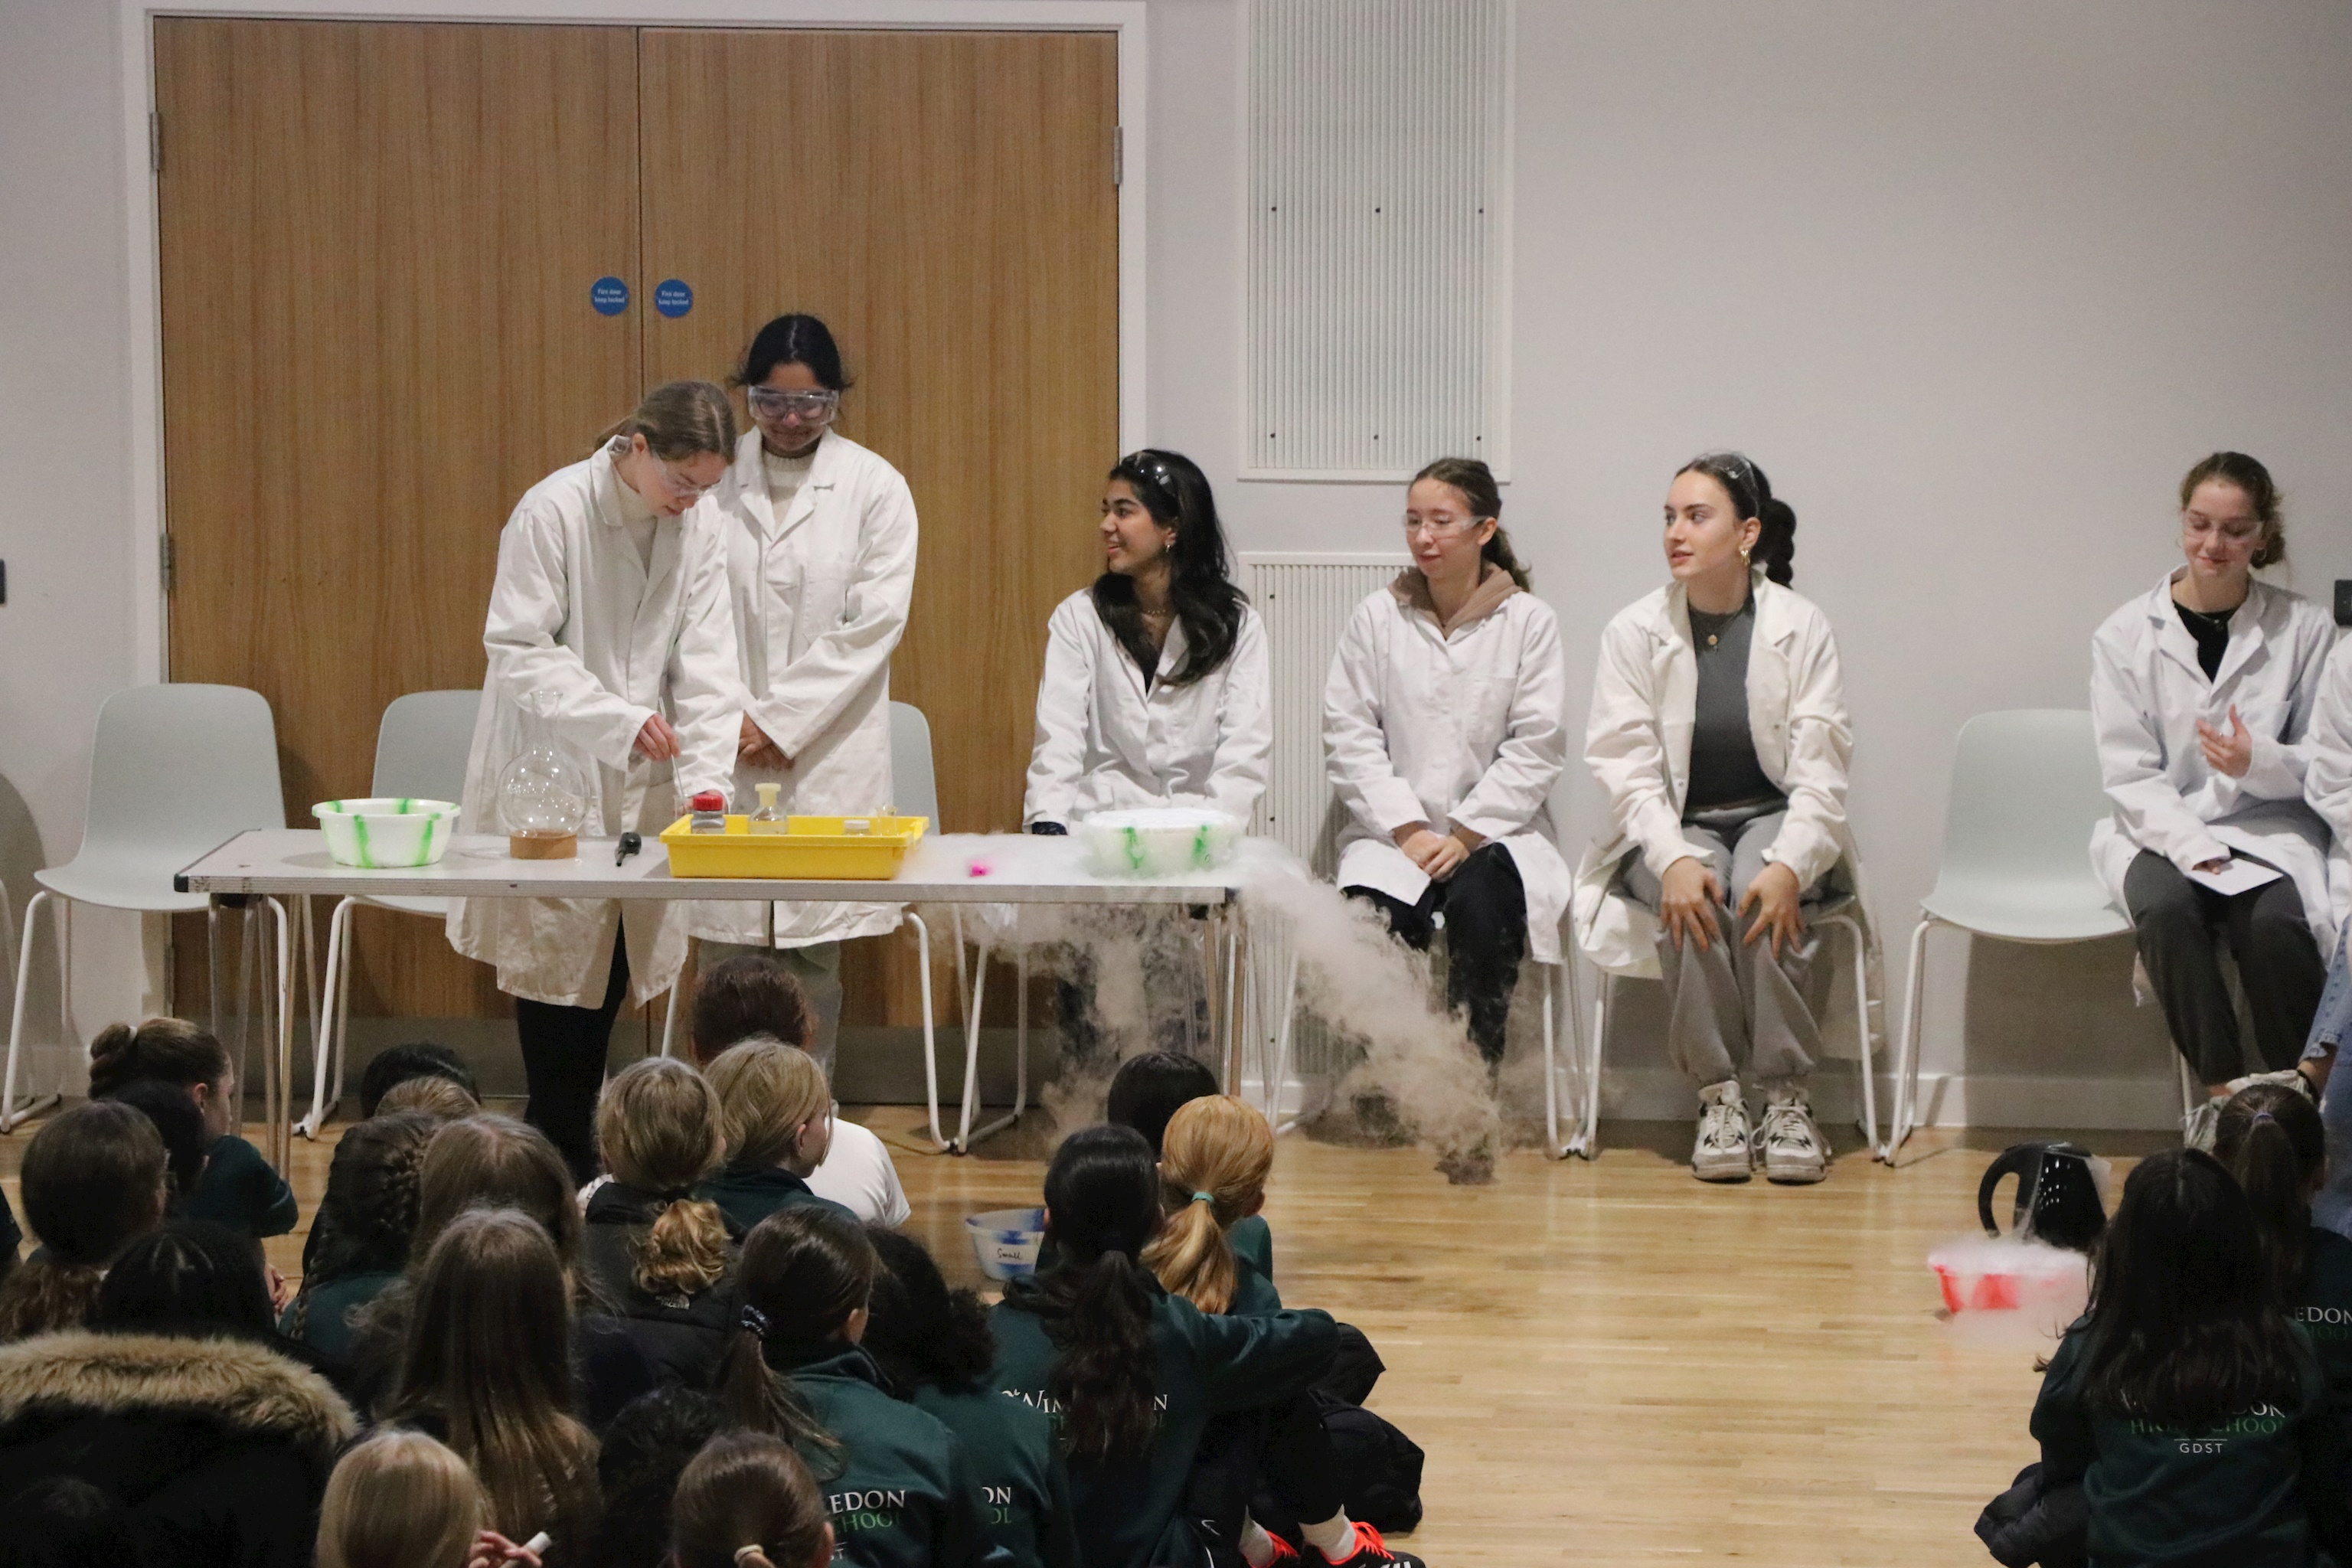 Six senior school girls wearing white lab coats and goggles. They are conducting an experiment with dry ice in front of the whole school during assembly